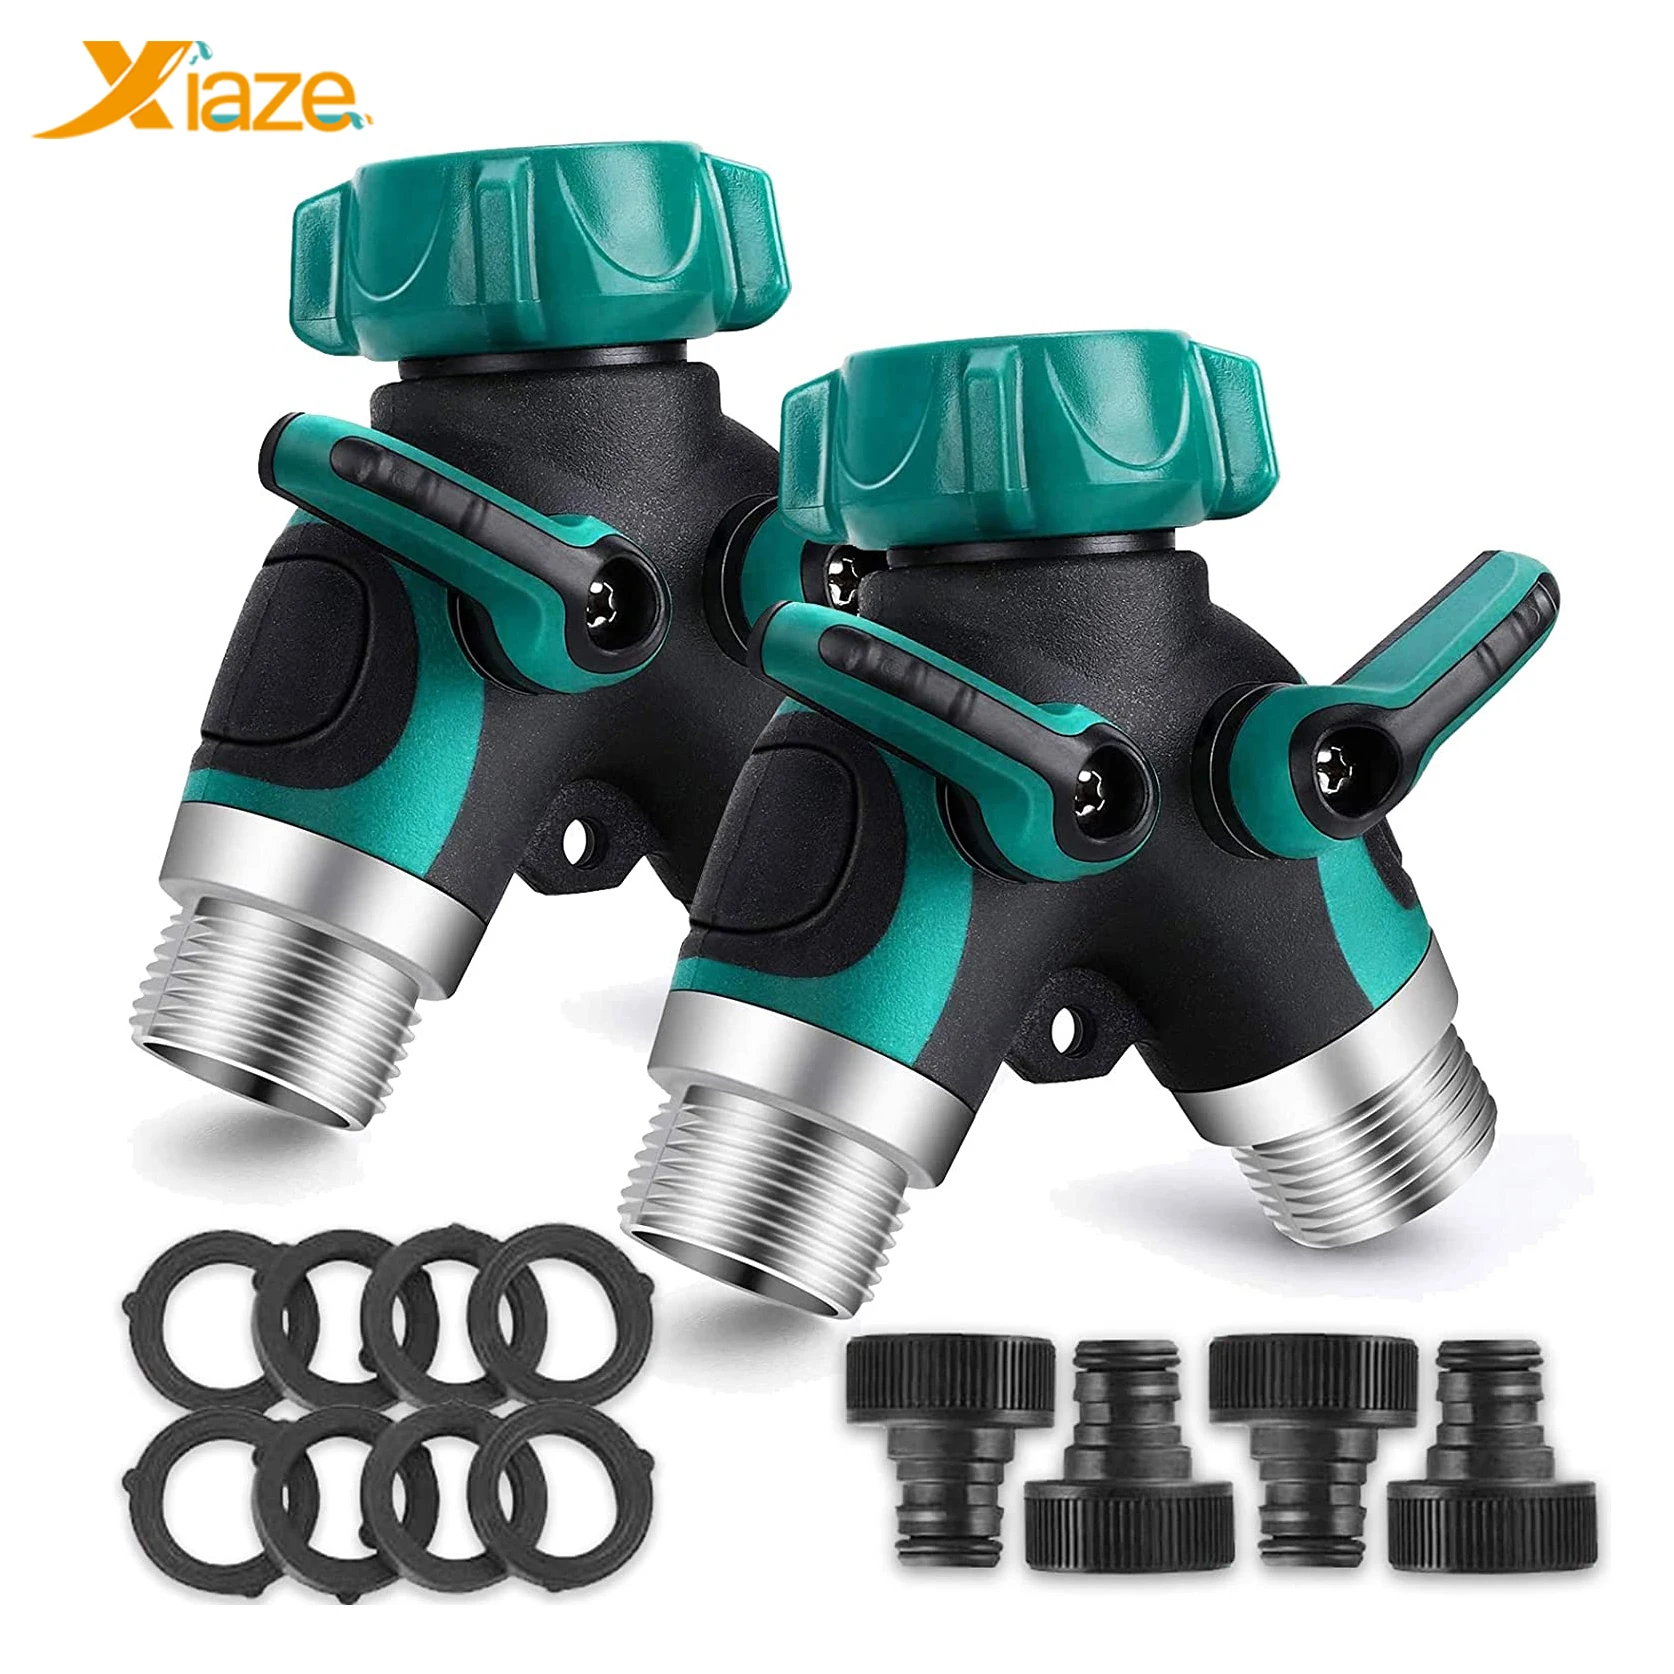 

2 Way tap fittings Splitter Hose Connector Outdoor Double Y Valve Water Tap Splitter Faucet Adapter with Quick Connectors